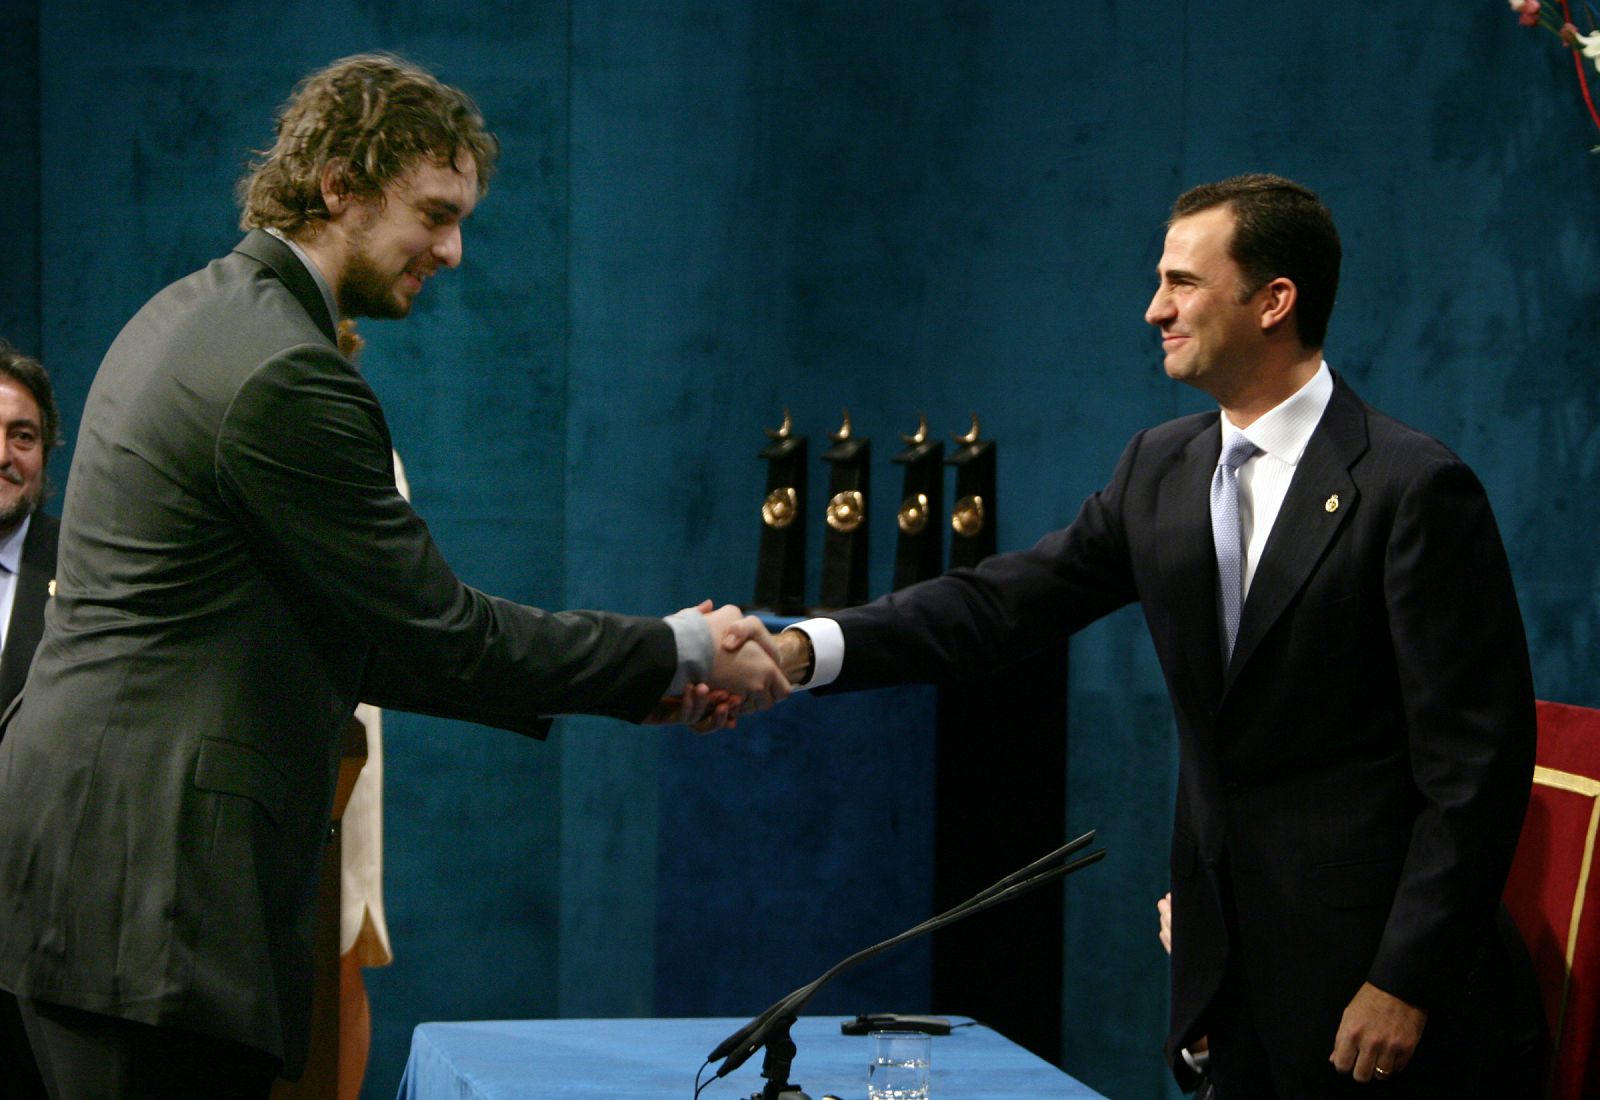 Spanish gold medal basketball player Gasol receives 2006 Prince of Asturias of Sports award from Spanish Crown Prince Felipe in Oviedo